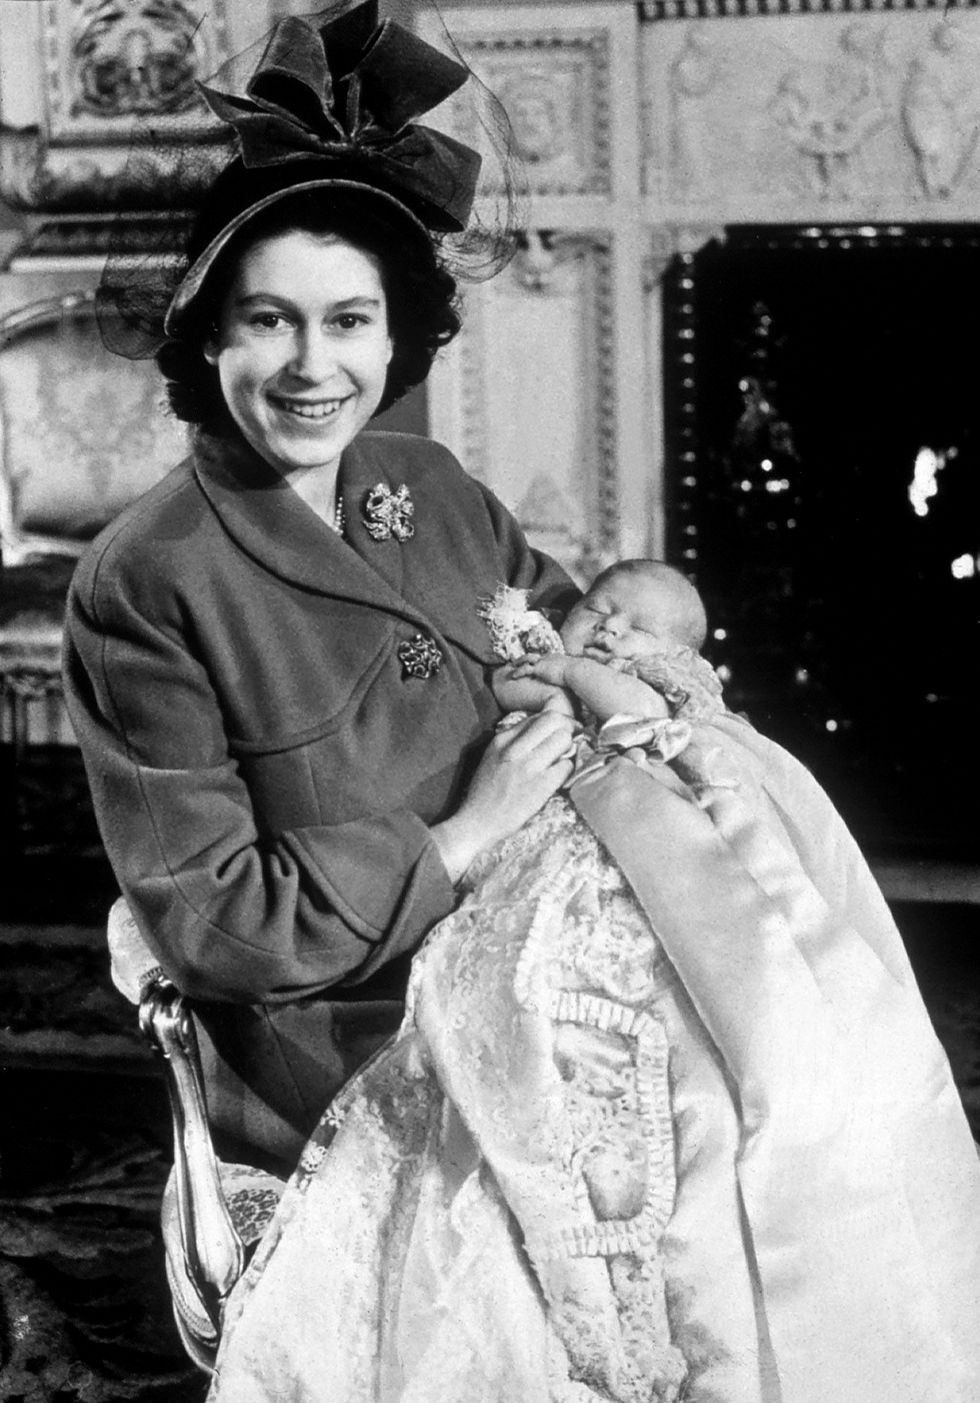 Her Majesty Queen Elizabeth II pictured when she was Princess Elizabeth with her first baby Prince Charles at Christenin